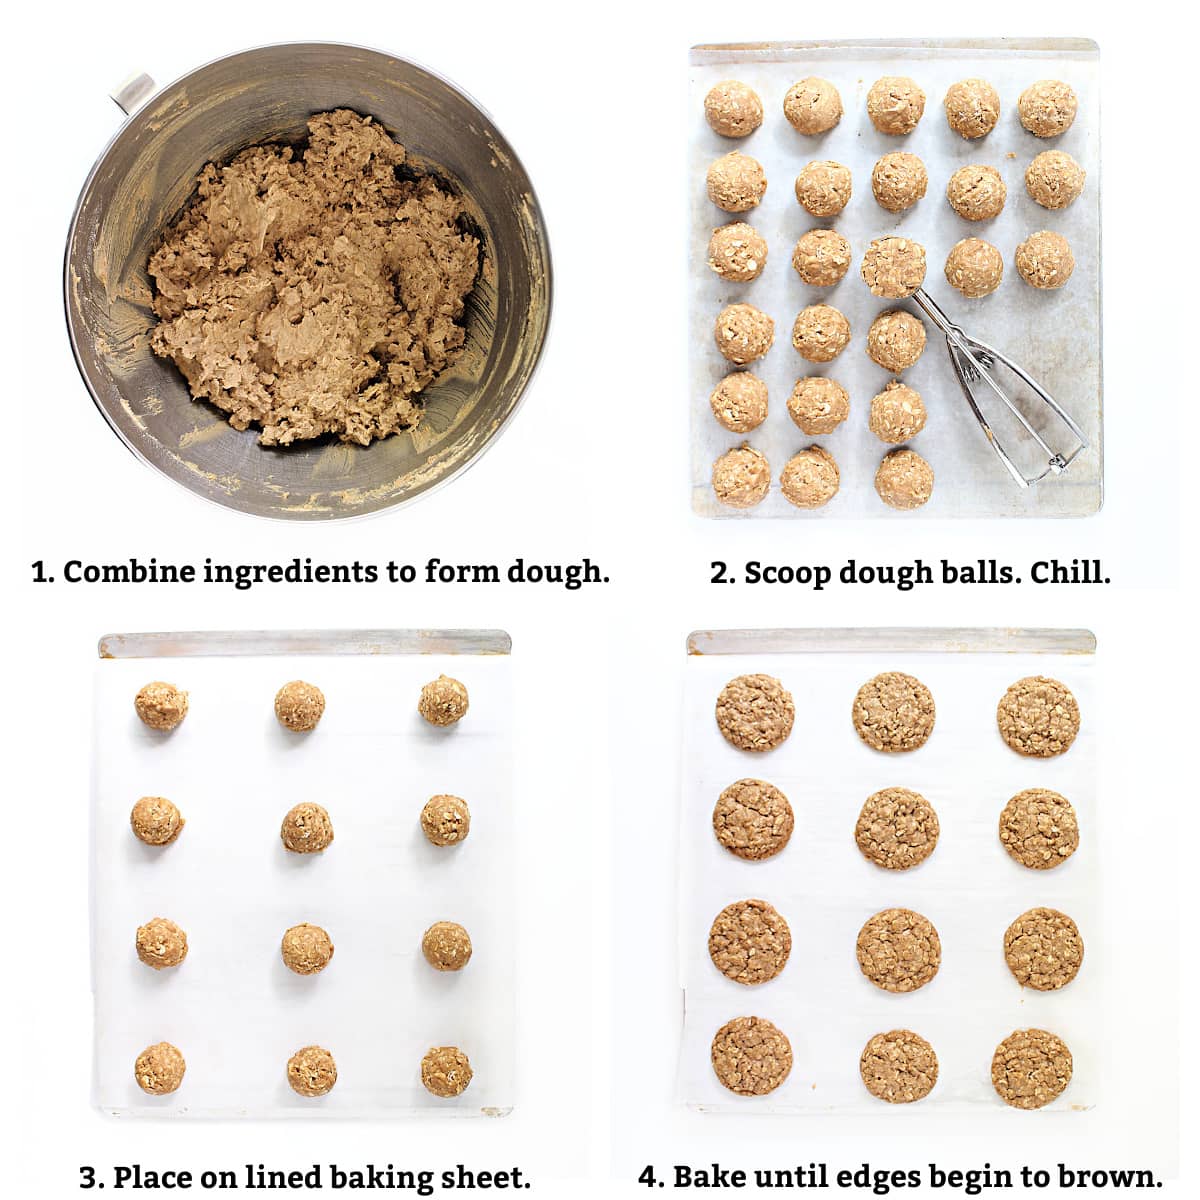 Cookie instructions: combine ingredients, scoop dough balls, chill, place on baking sheet, bake.